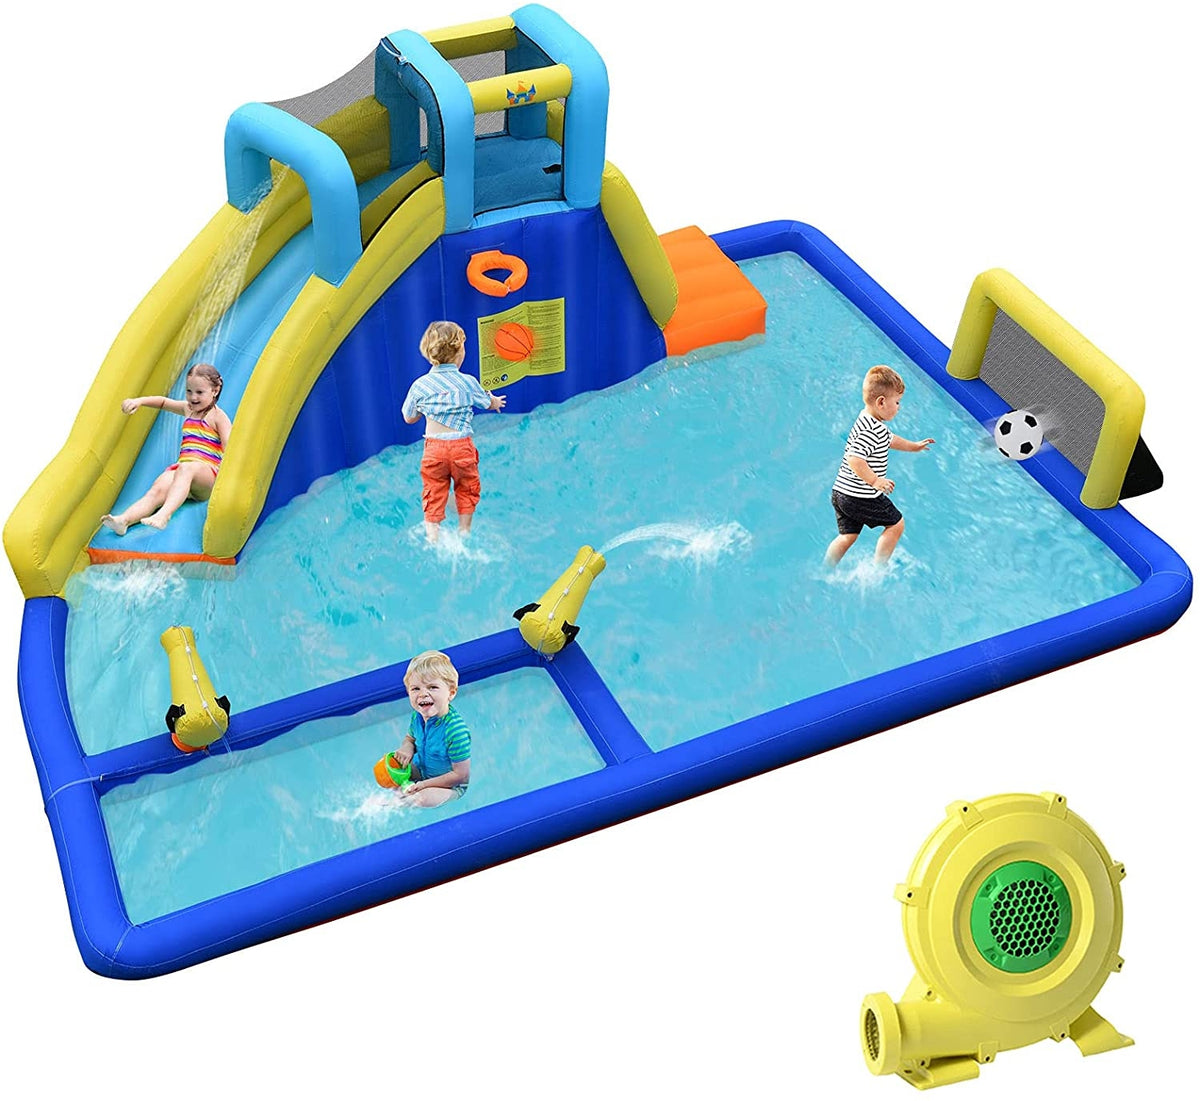 6-in-1 Inflatable Water Slides with Blower for Kids